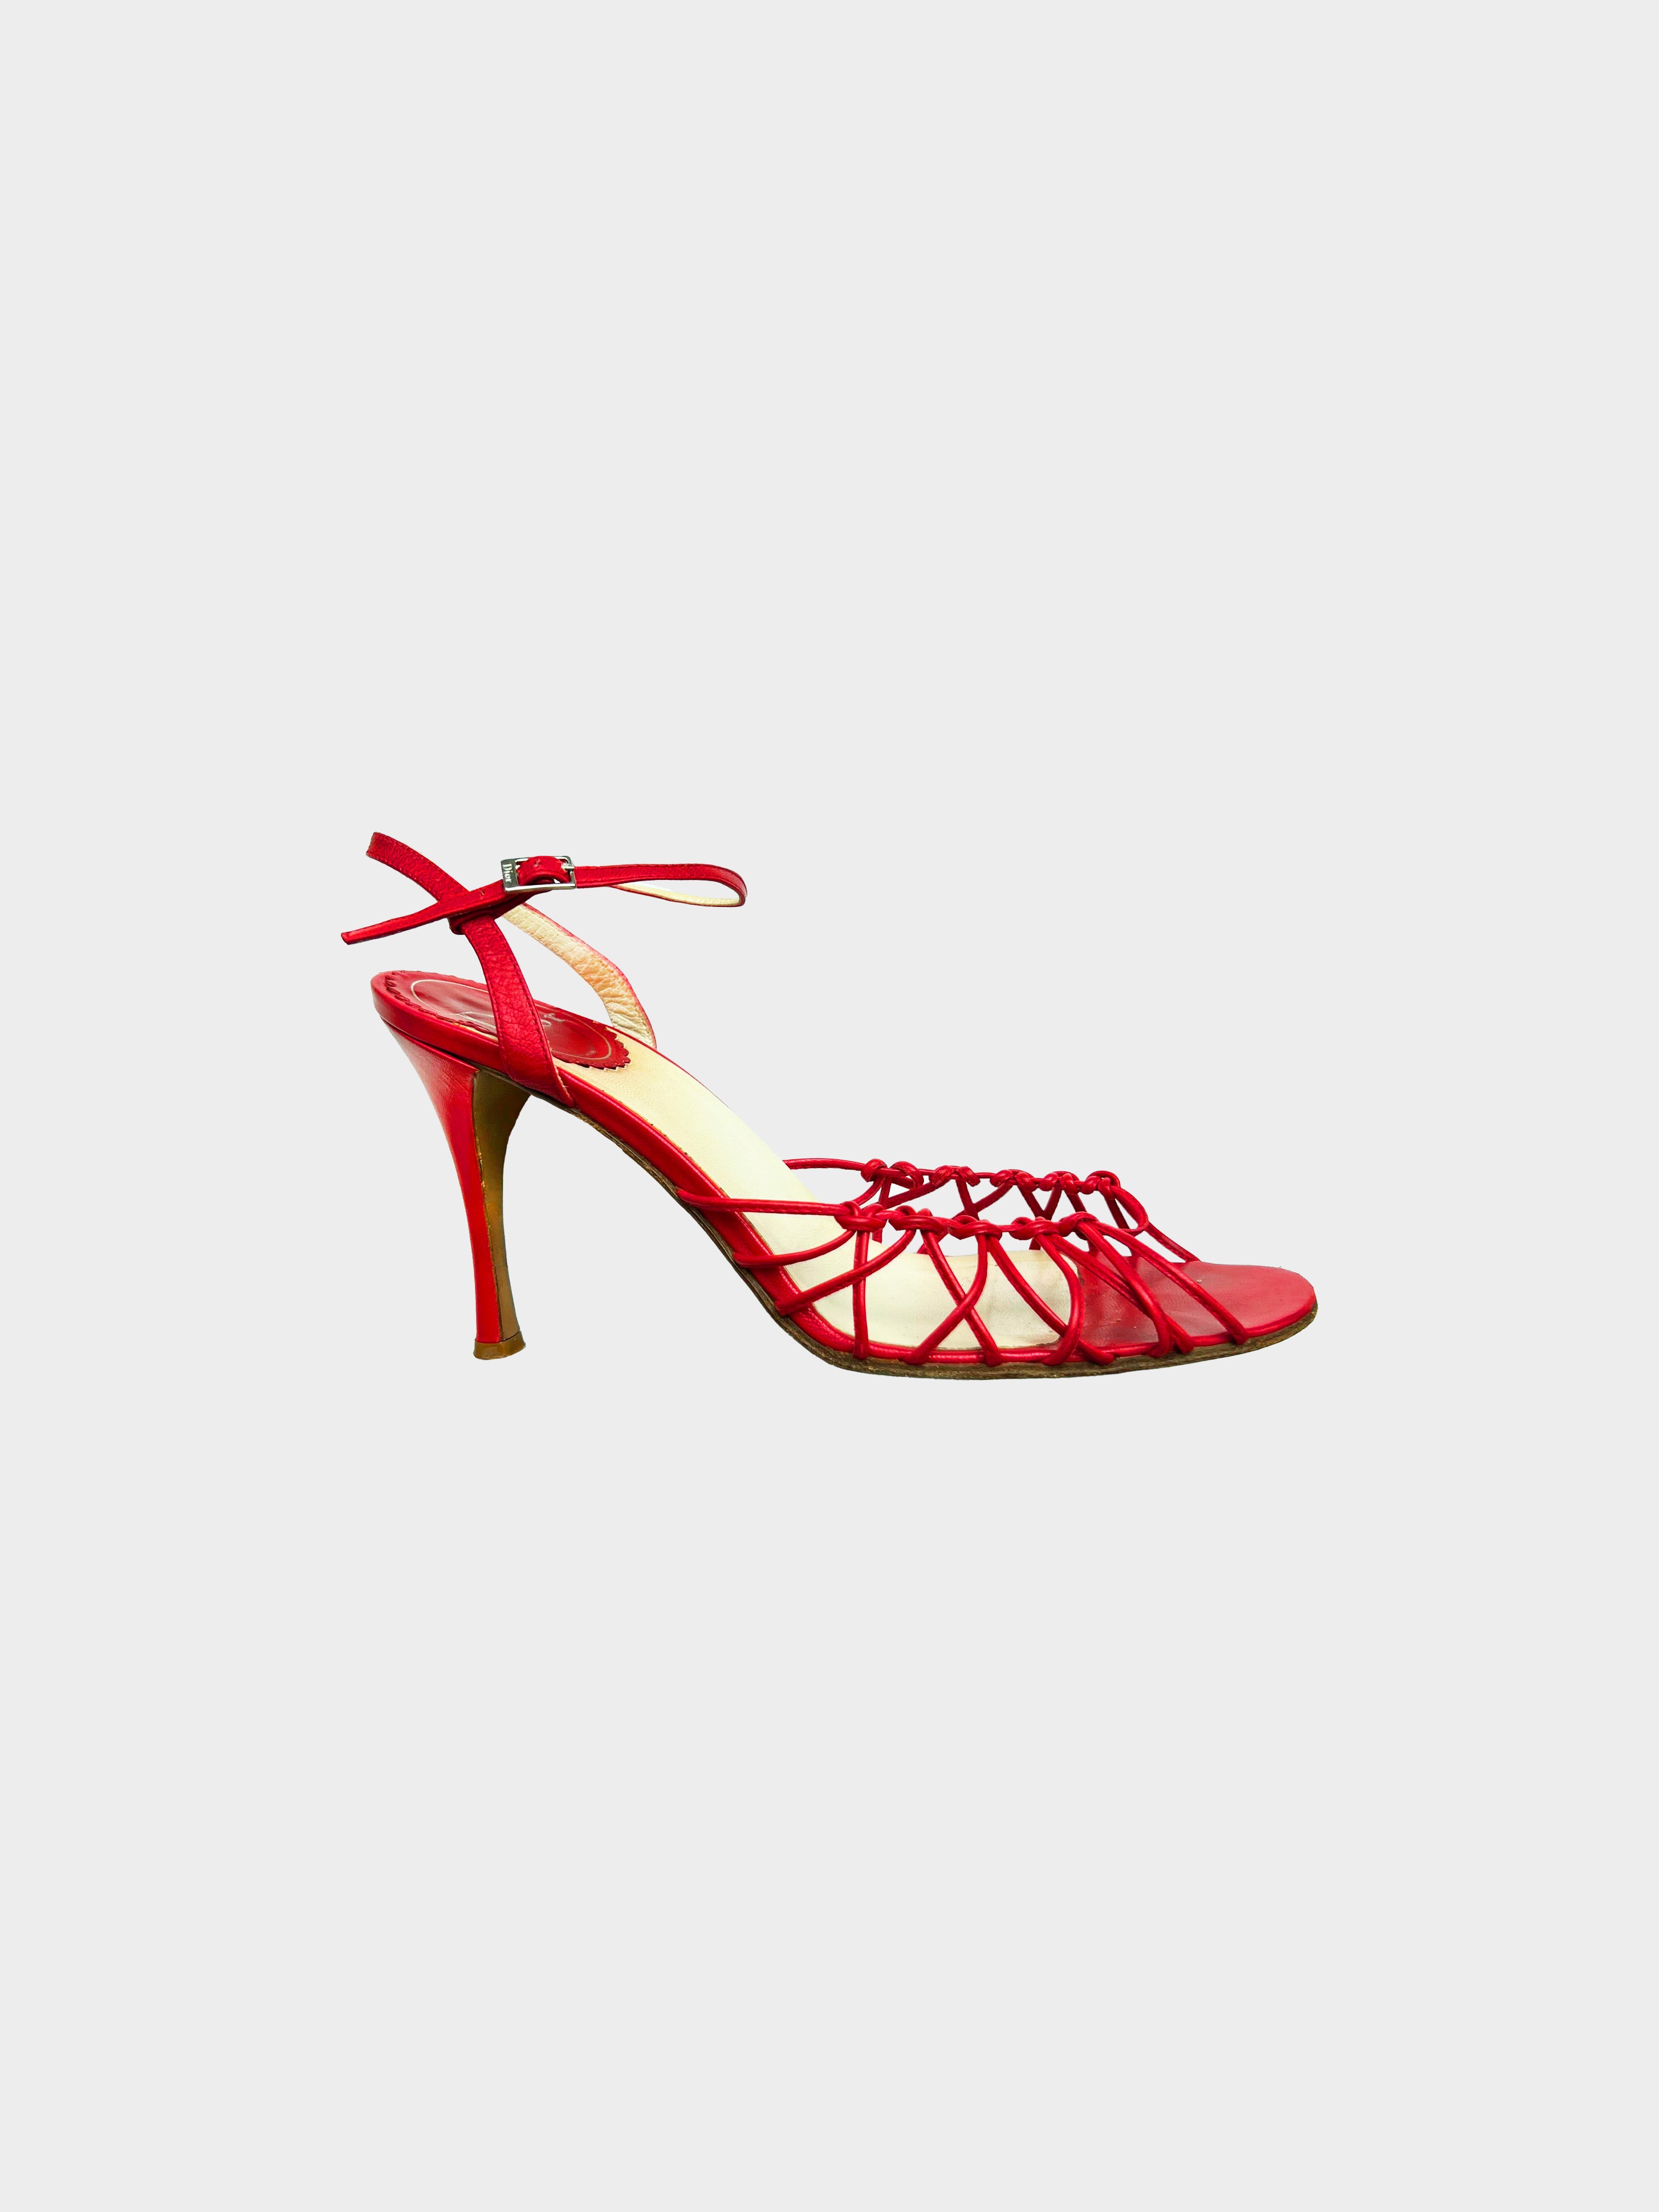 Christian Dior 1990s Red Strappy Caged Heels